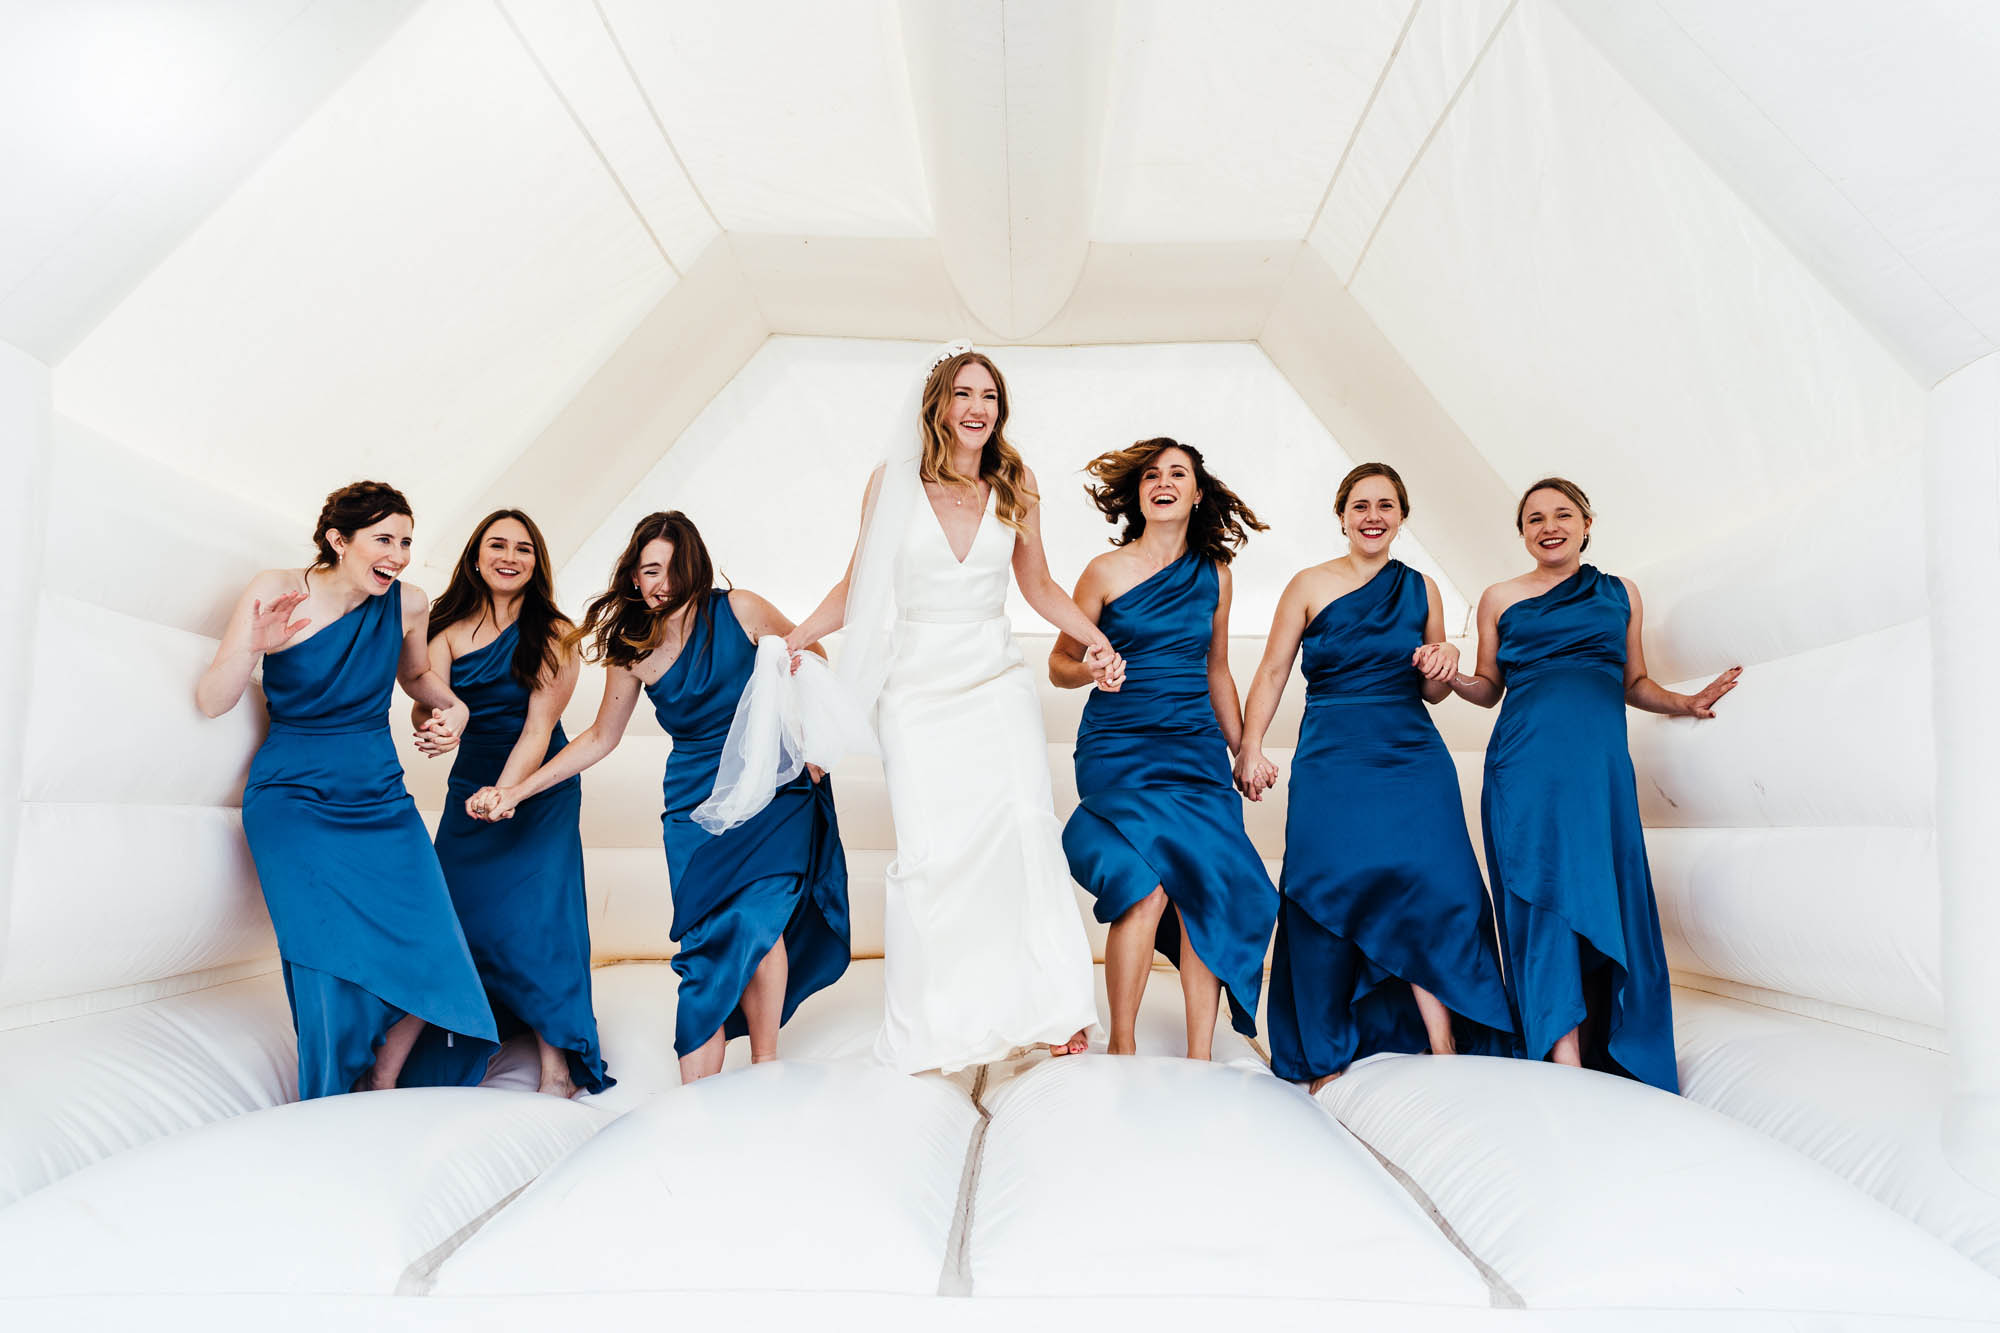 Bride with her bridesmaids laughing as they play in a white bouncy castle - by Hannah Hall Photography